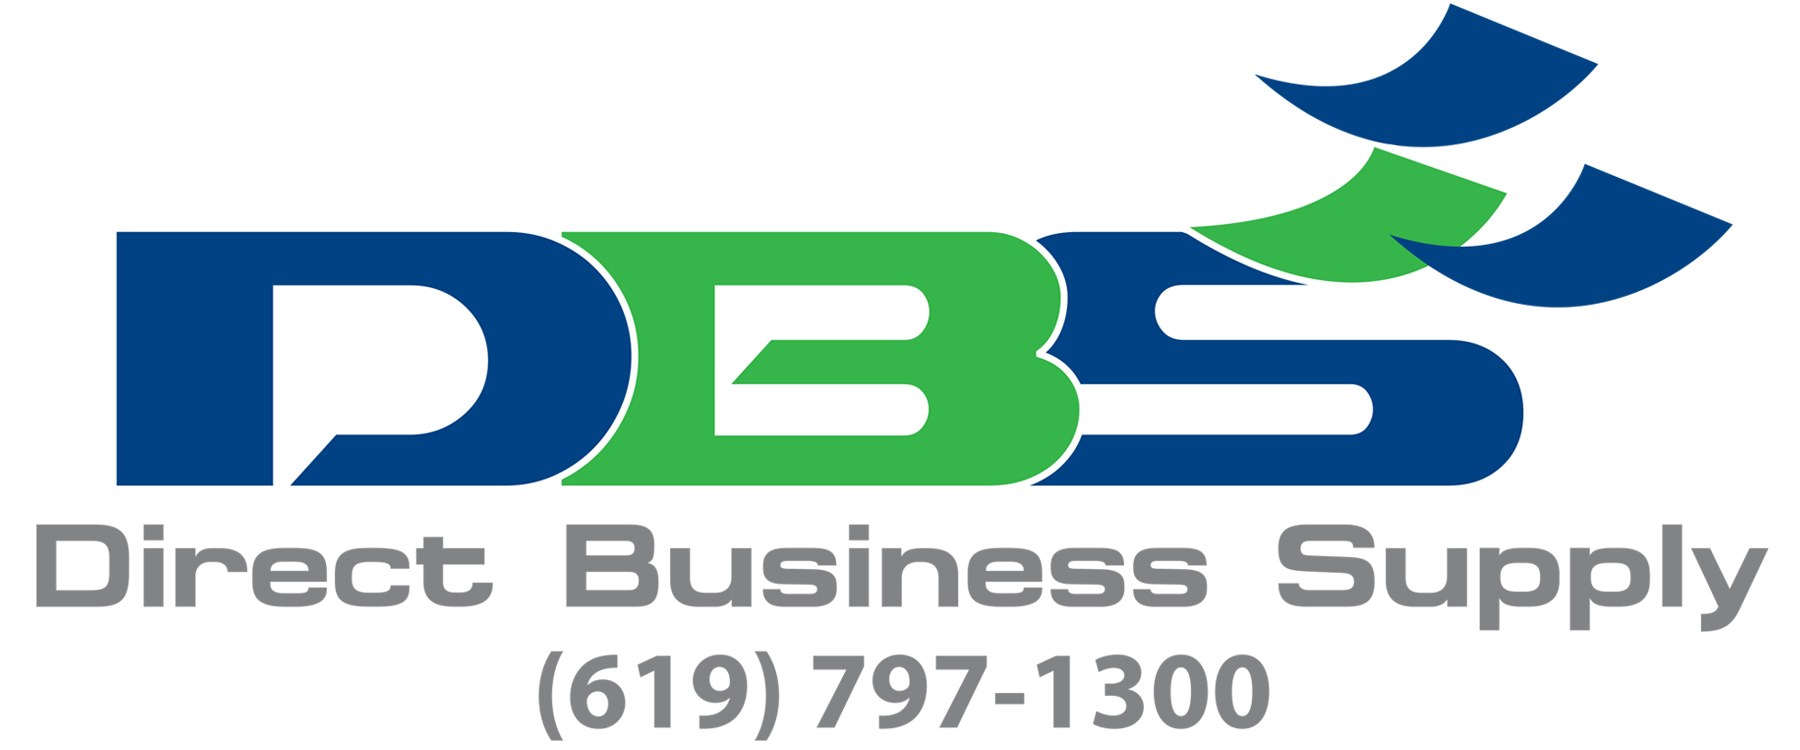 Direct Business Supply's Logo